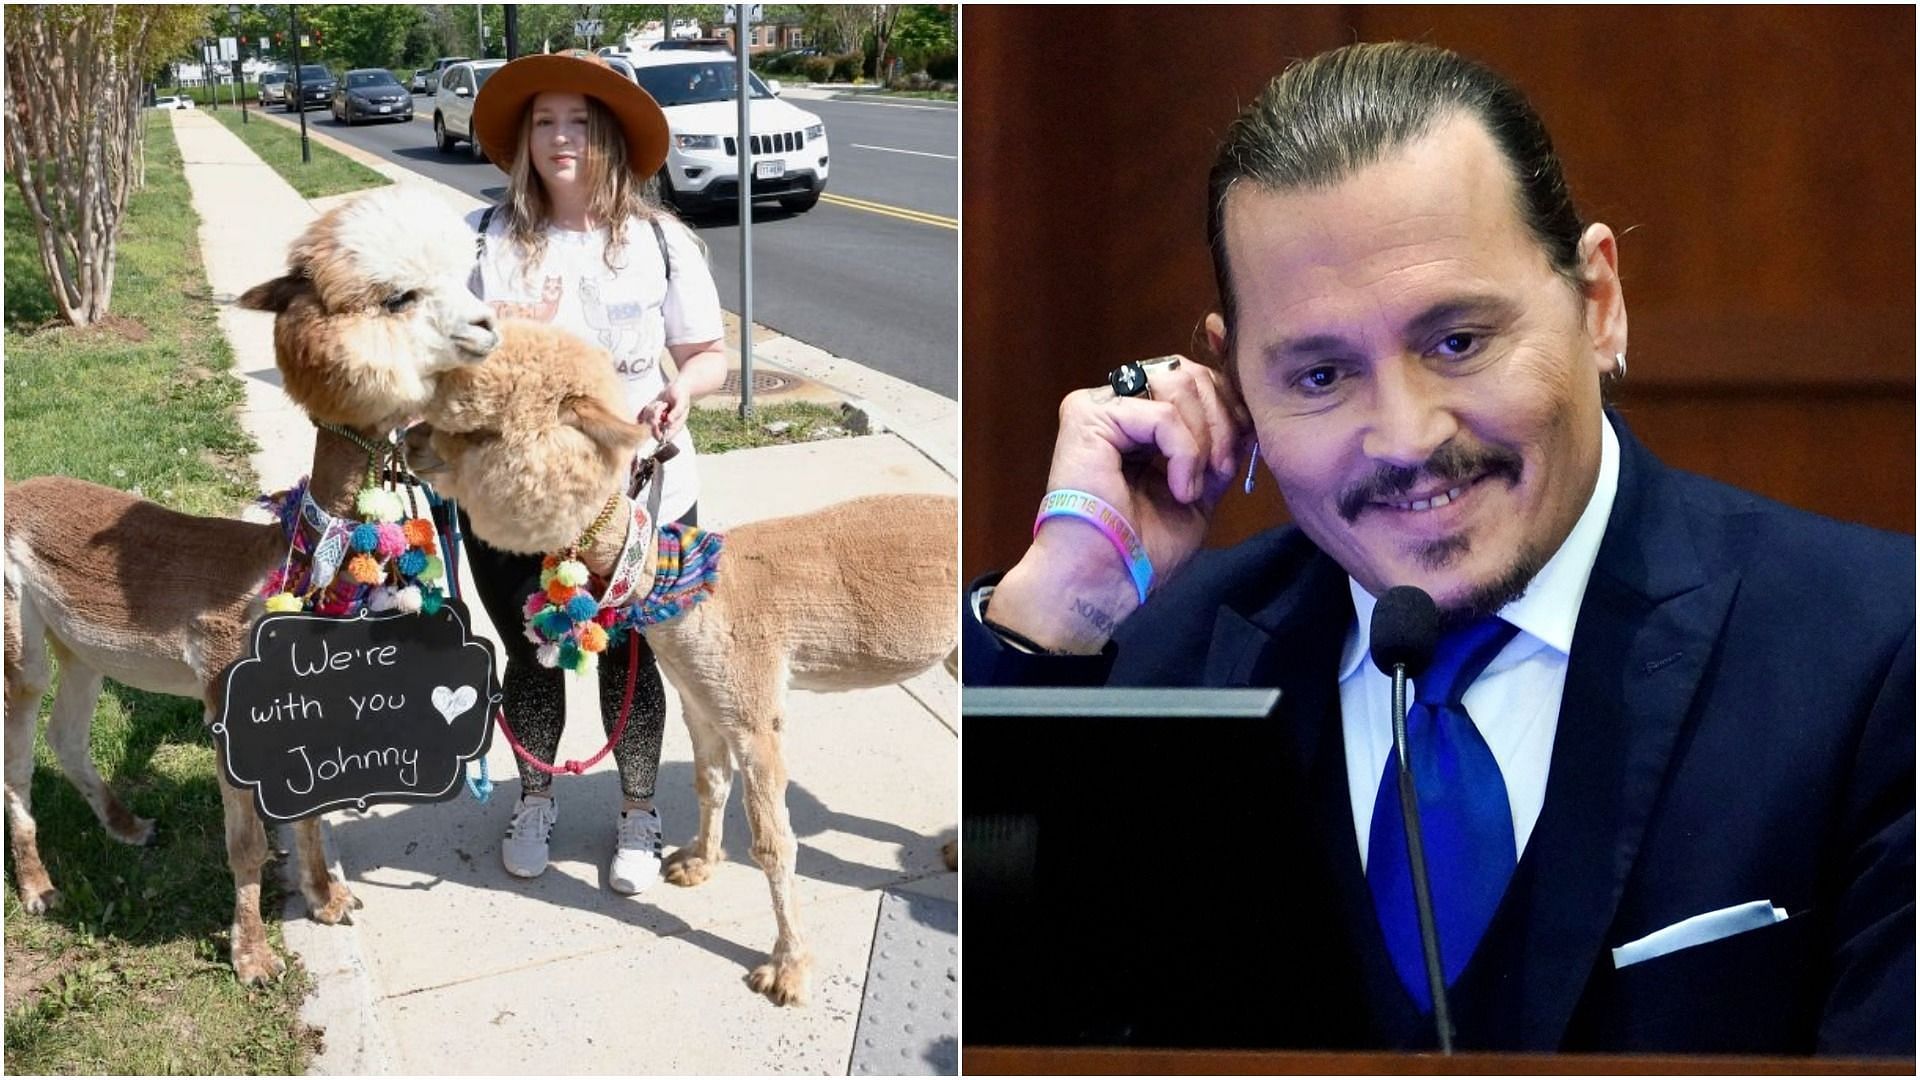 Fan outside court with alpacas and Johnny Depp&#039;s smile during the ongoing trial (Image via Paul Morigi/Getty Images, and Steve Helber/Pool/AFP/Getty Images)